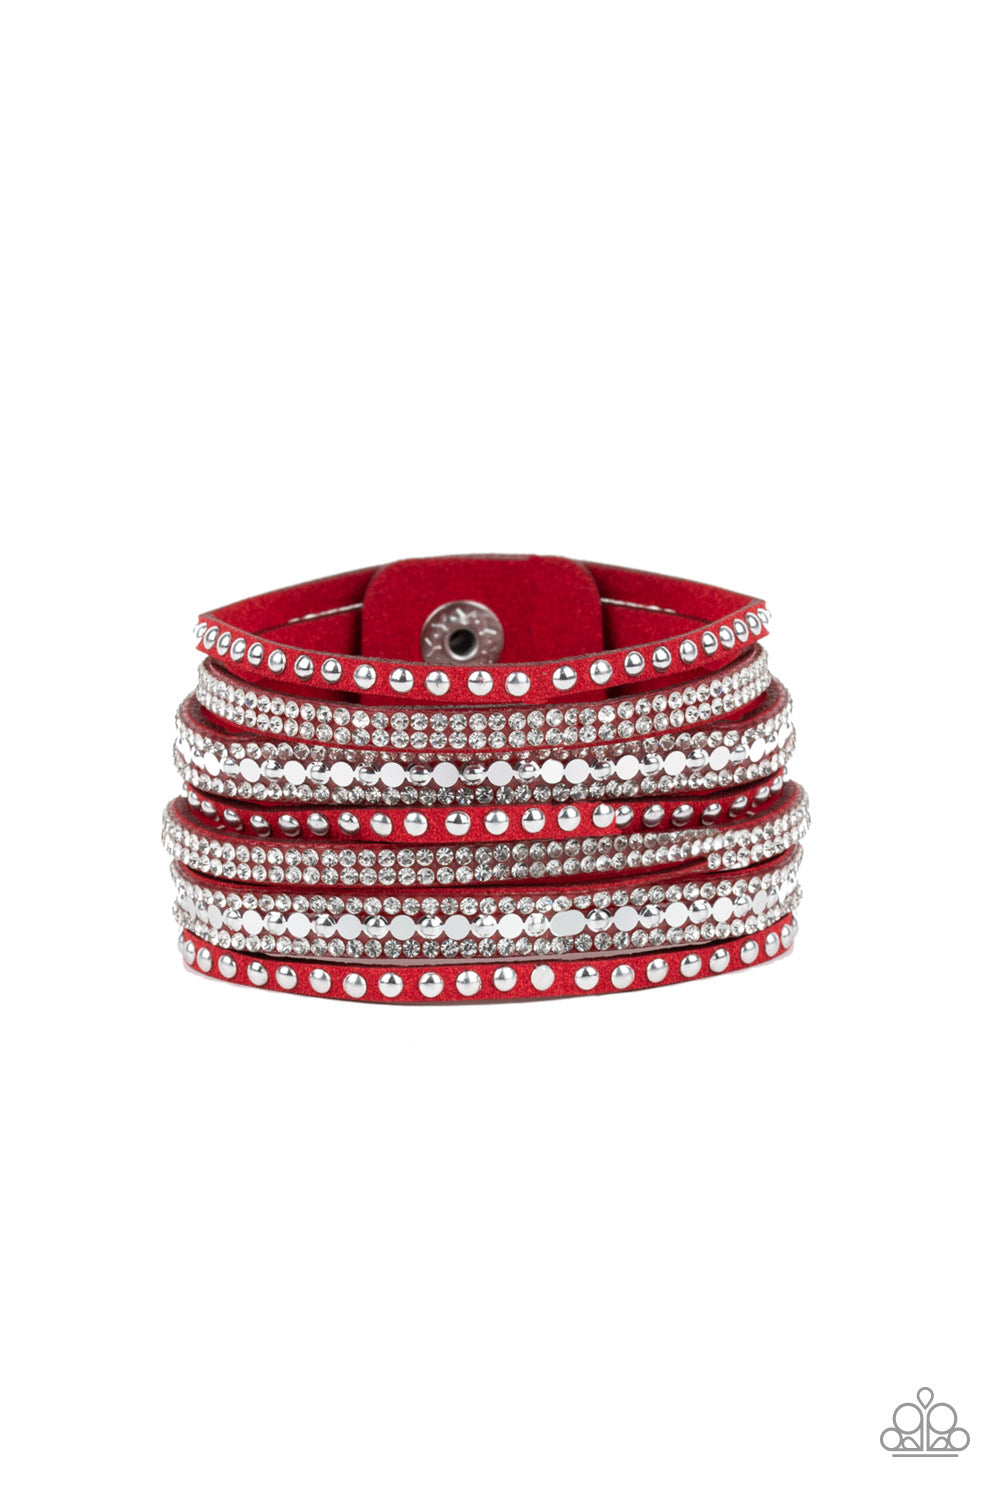 All Hustle and Hairspray - Red Bracelet - Paparazzi Accessories